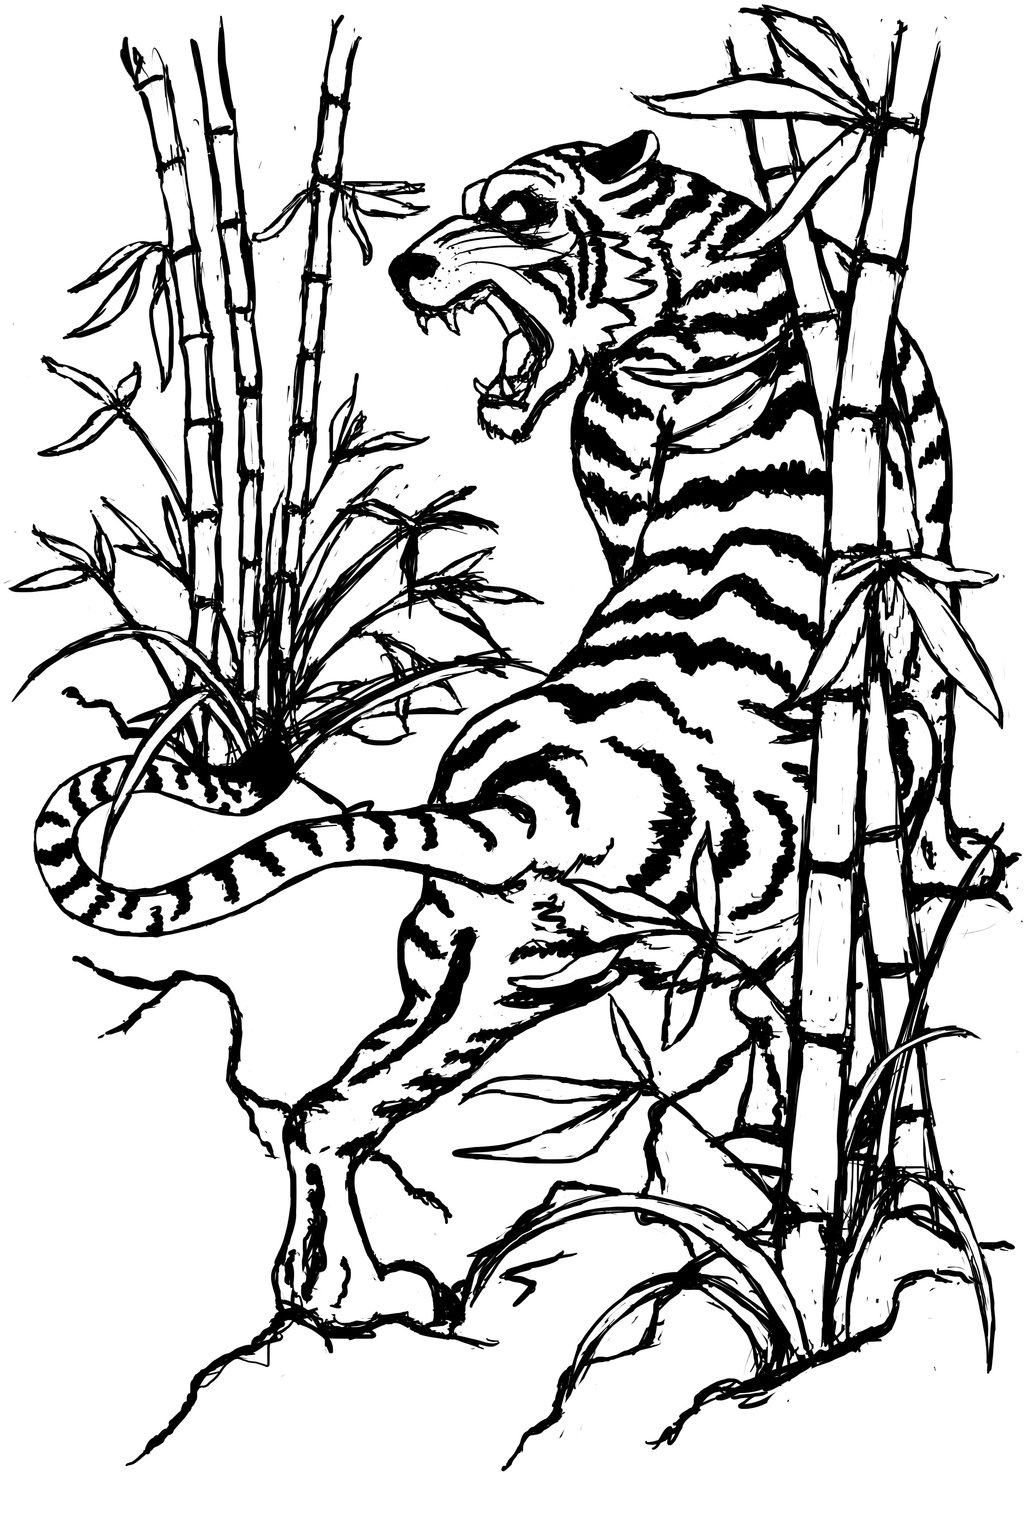 Black-and-white chinese style tiger among bamboo stems tattoo design by Jdstone